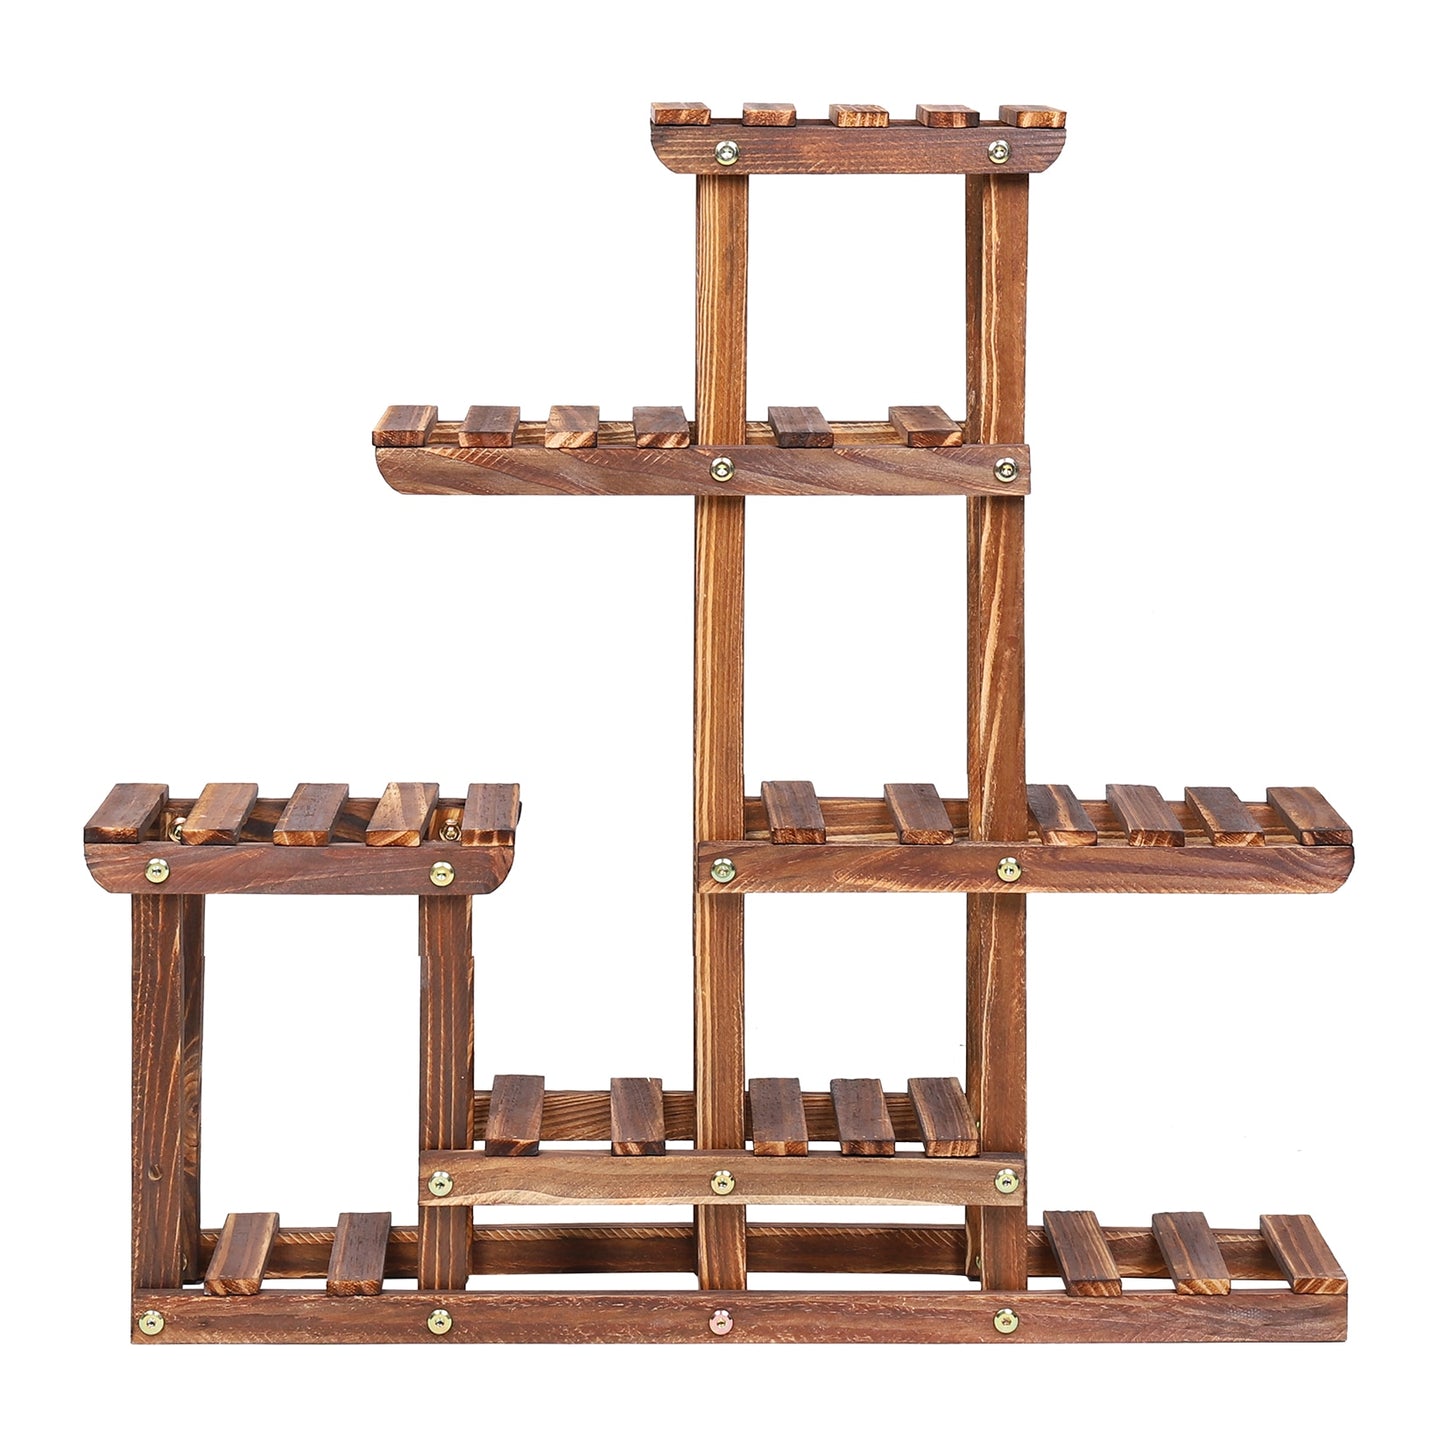 Solid Wood Plant Pot Stand for Indoor and Outdoor SKU 35003